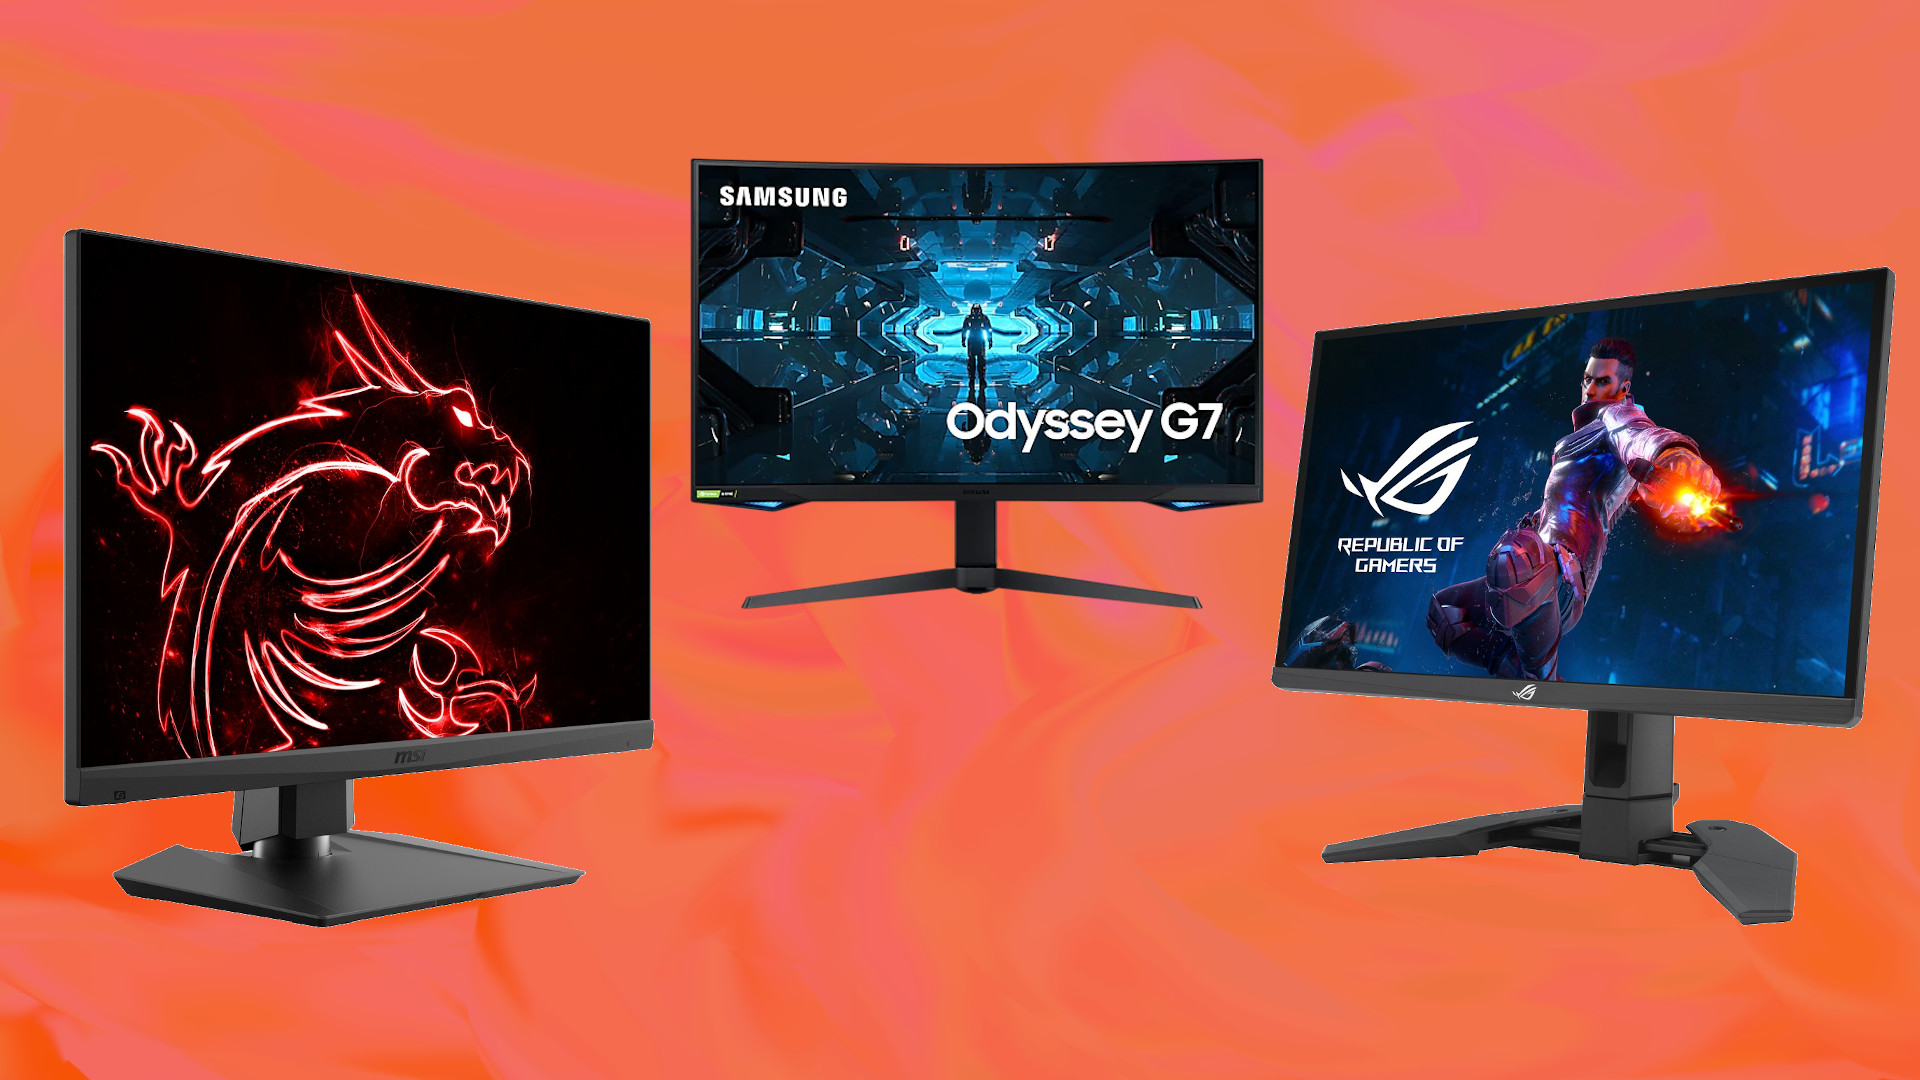 TN vs IPS displays - which is better for gaming?